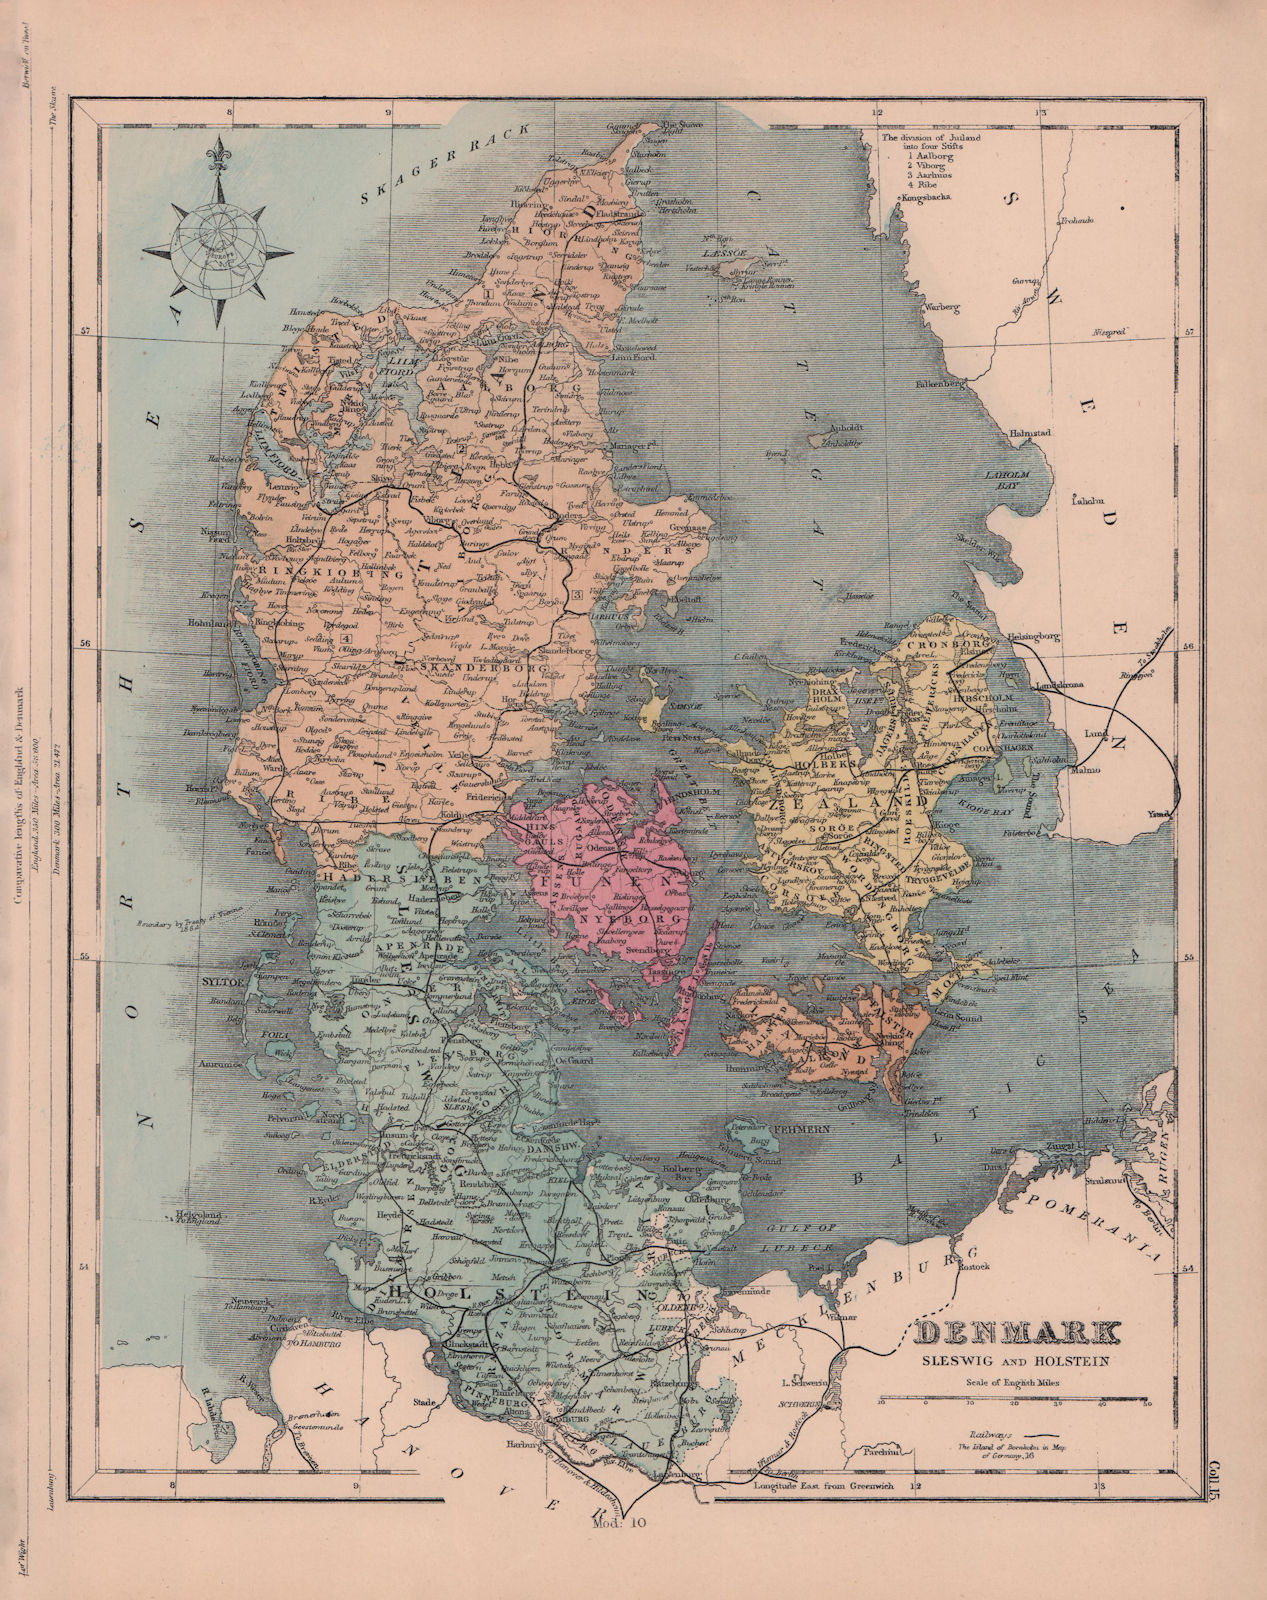 Associate Product Denmark, Schleswig and Holstein. Railways. HUGHES 1876 old antique map chart